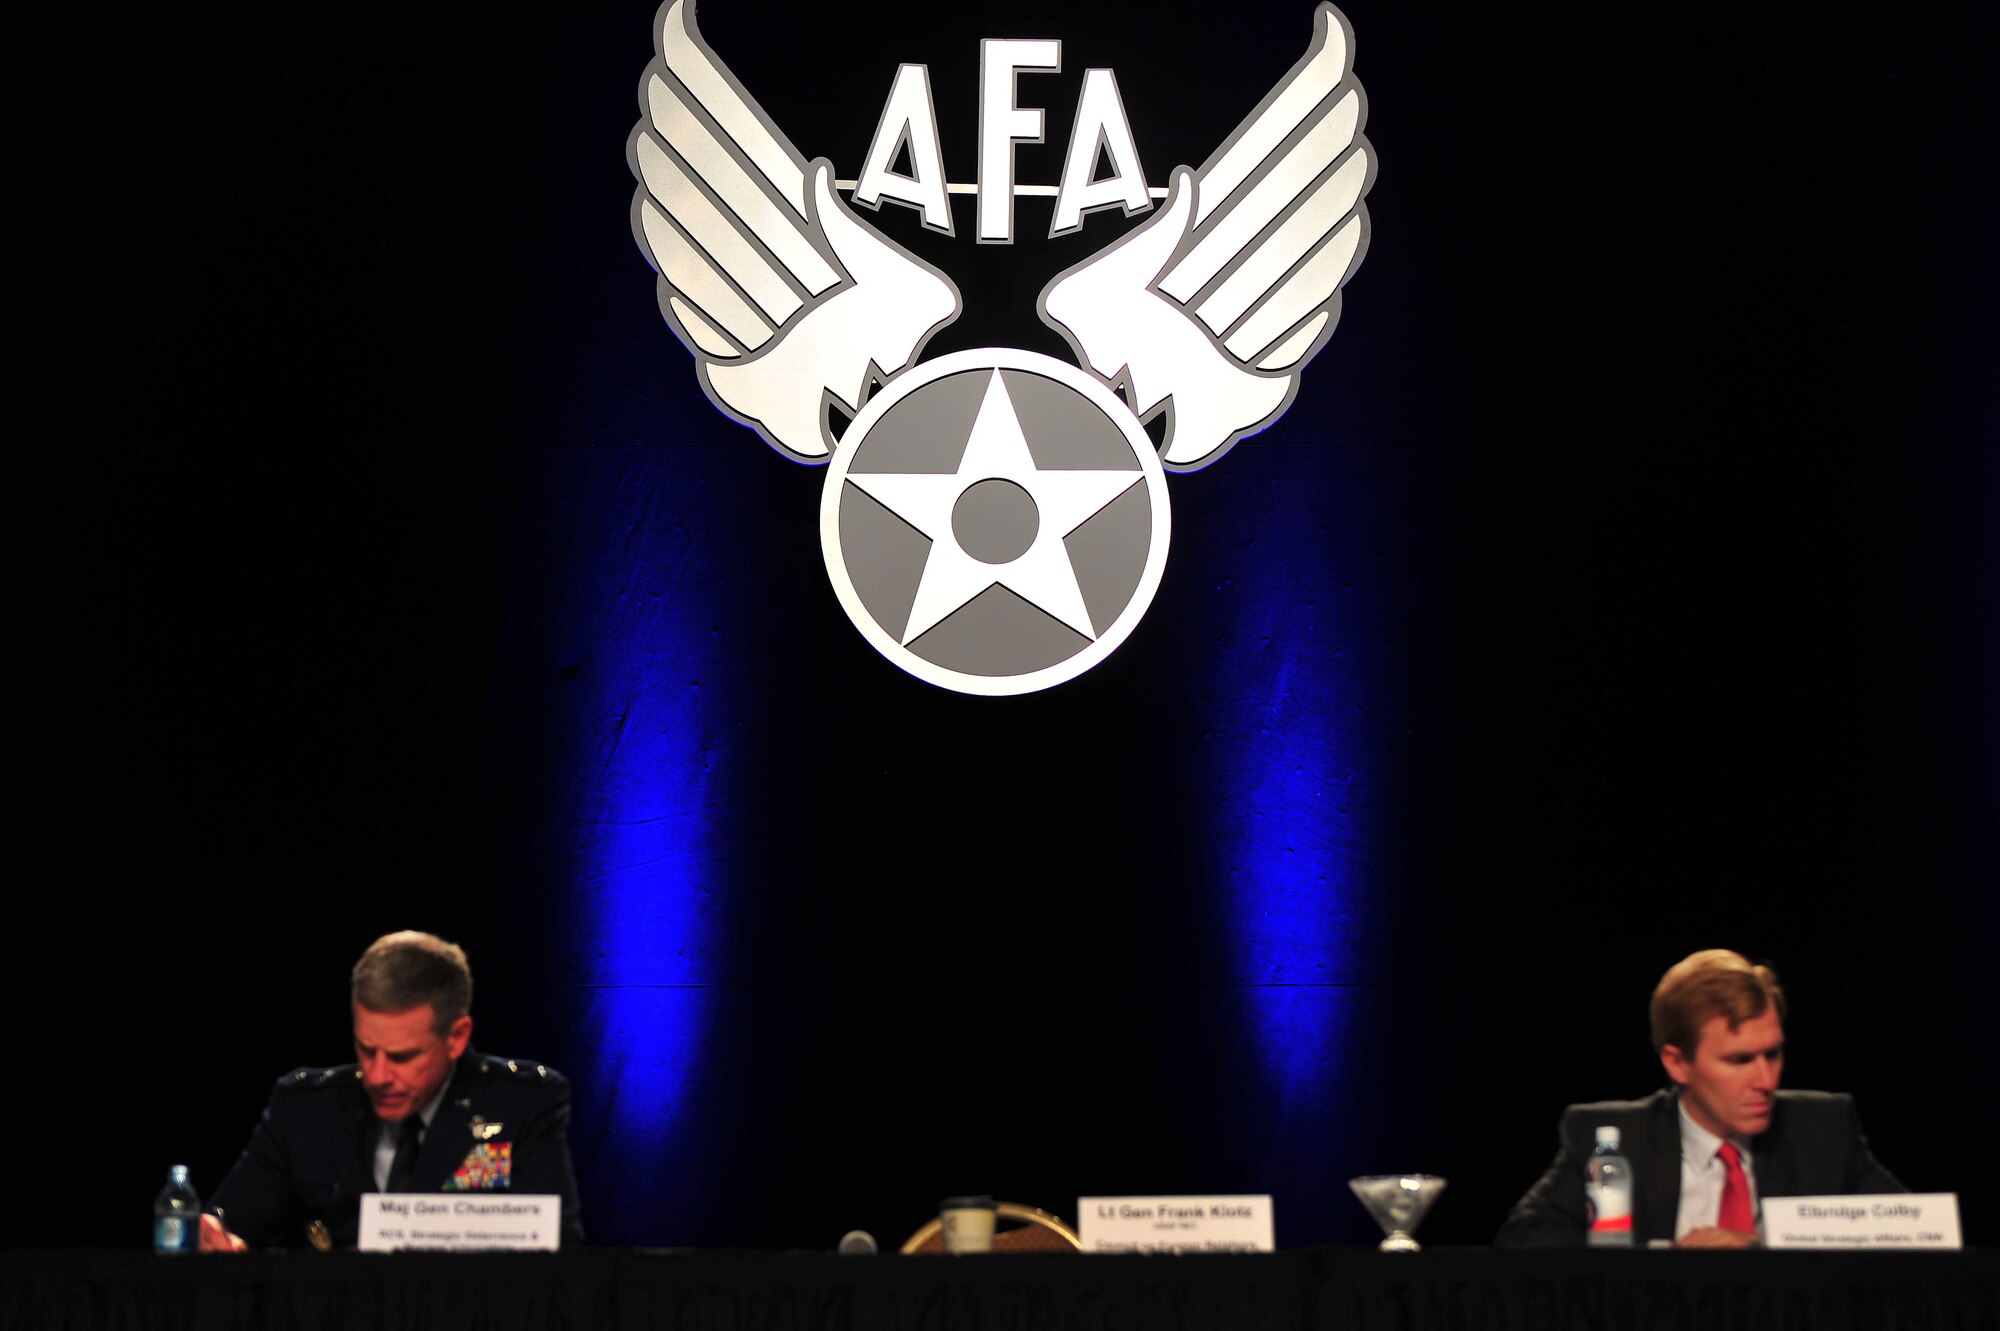 Maj. Gen. William A. Chambers, Strategic Deterrence and Nuclear Integration assistant chief of staff,  and Elbridge Colby, Global Strategic Affairs Center for Analyses principal analist and division lead, review notes during a panel discussion on the role of the Intercontinental Ballistic Missle force in the 21st Century Deterrence at the Air Force Association Air and Space conference Sept. 18 in Washington, D.C. ICBM force attributes were compared and discussed in light of ongoing debates concerning U.S. nuclear force structure. (U.S. Air Force photo by Senior Airman Steele C. G. Britton)